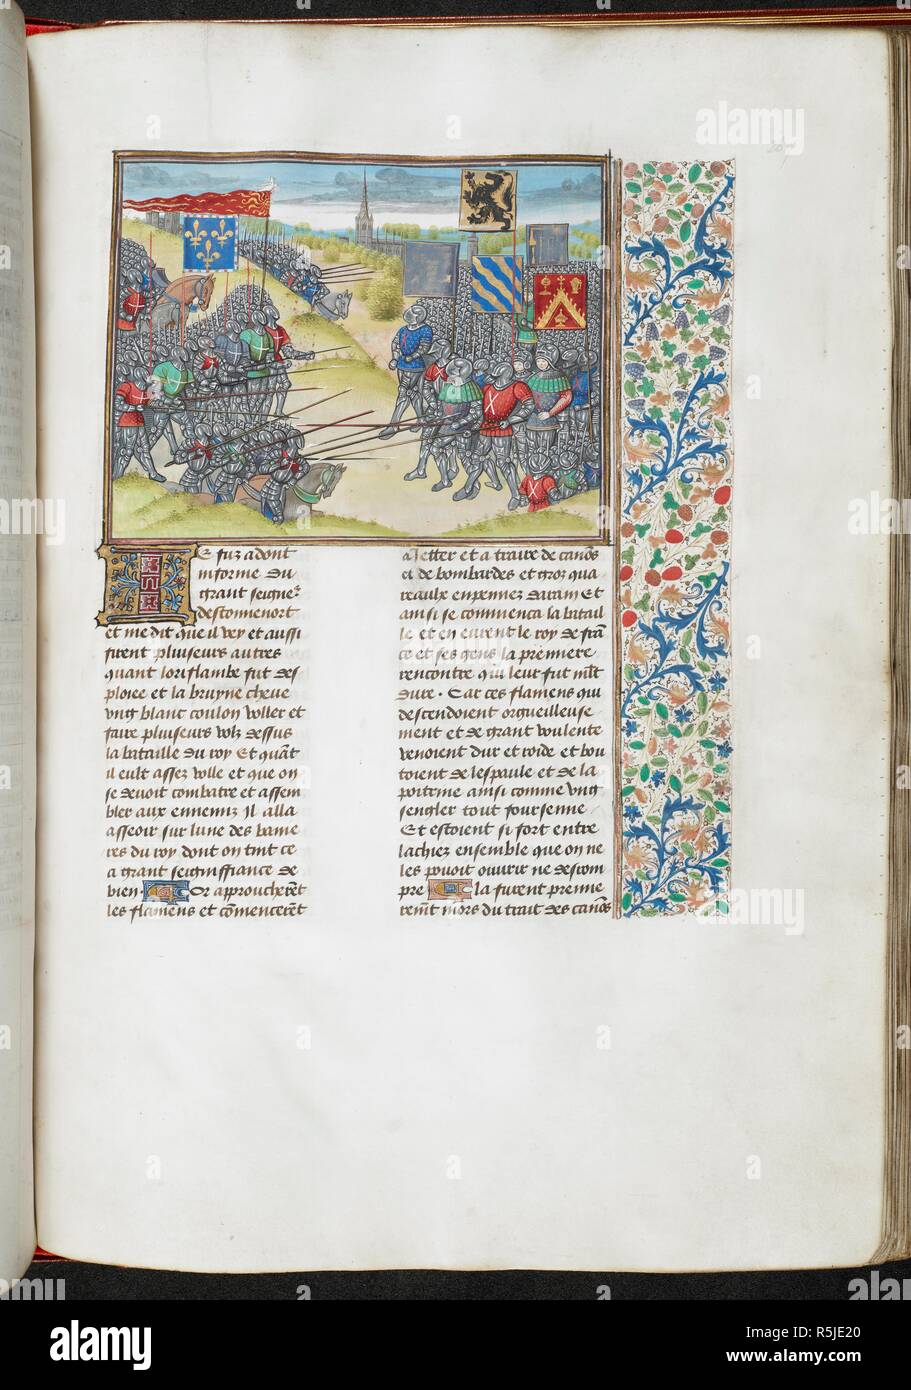 Battle of Mont d'Or. Text and floral border. Chroniques. Netherlands, S. Last quarter of the 15th century, before 1483. Source: Royal 18 E. I f.269. Language: French. Author: Froissart, Jehan. Stock Photo